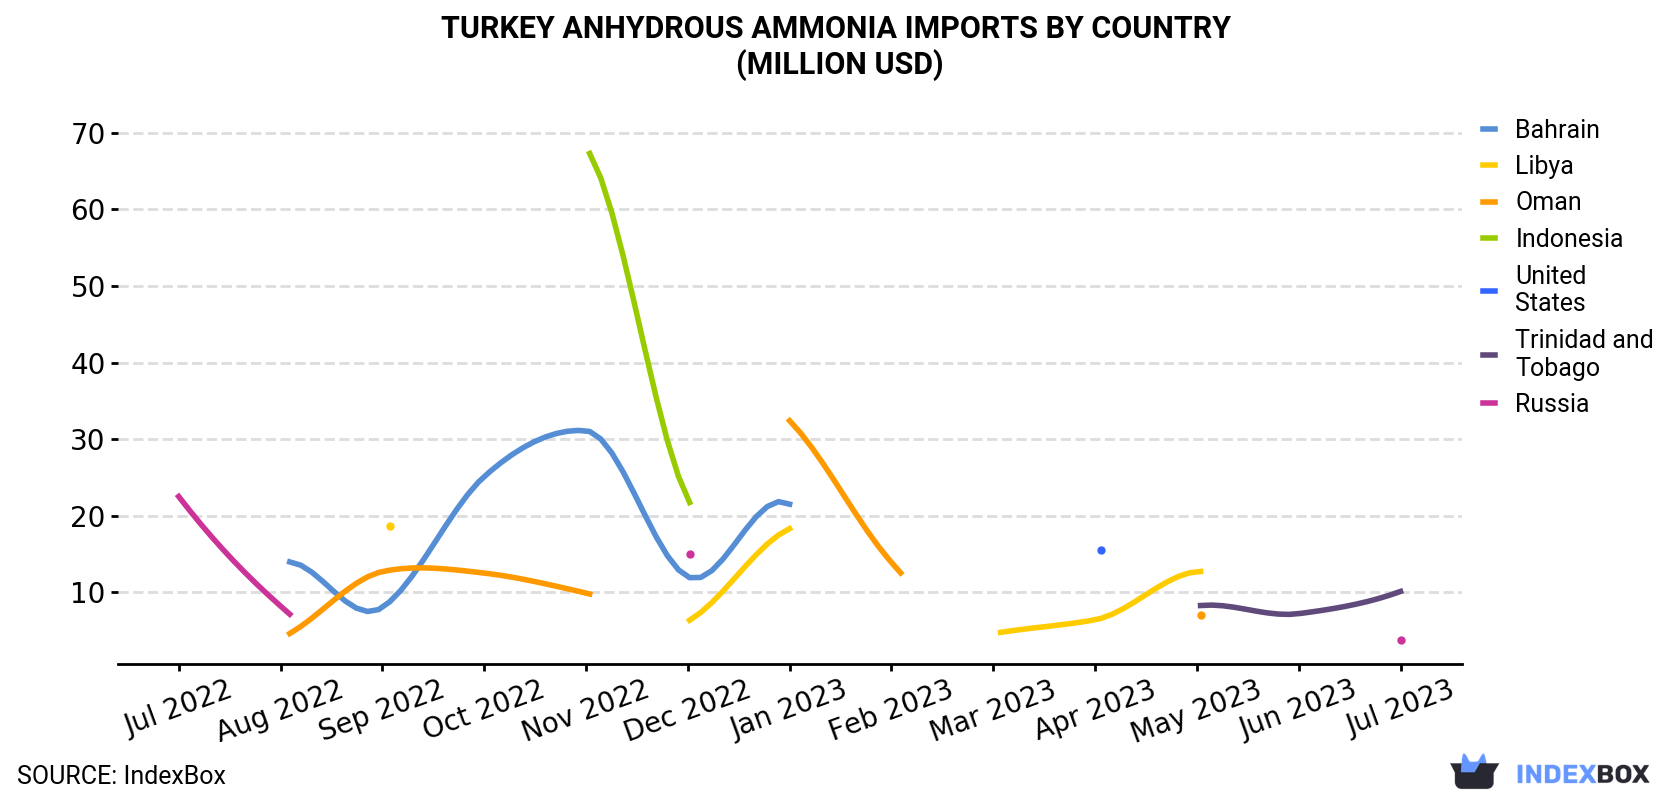 Turkey Anhydrous Ammonia Imports By Country (Million USD)